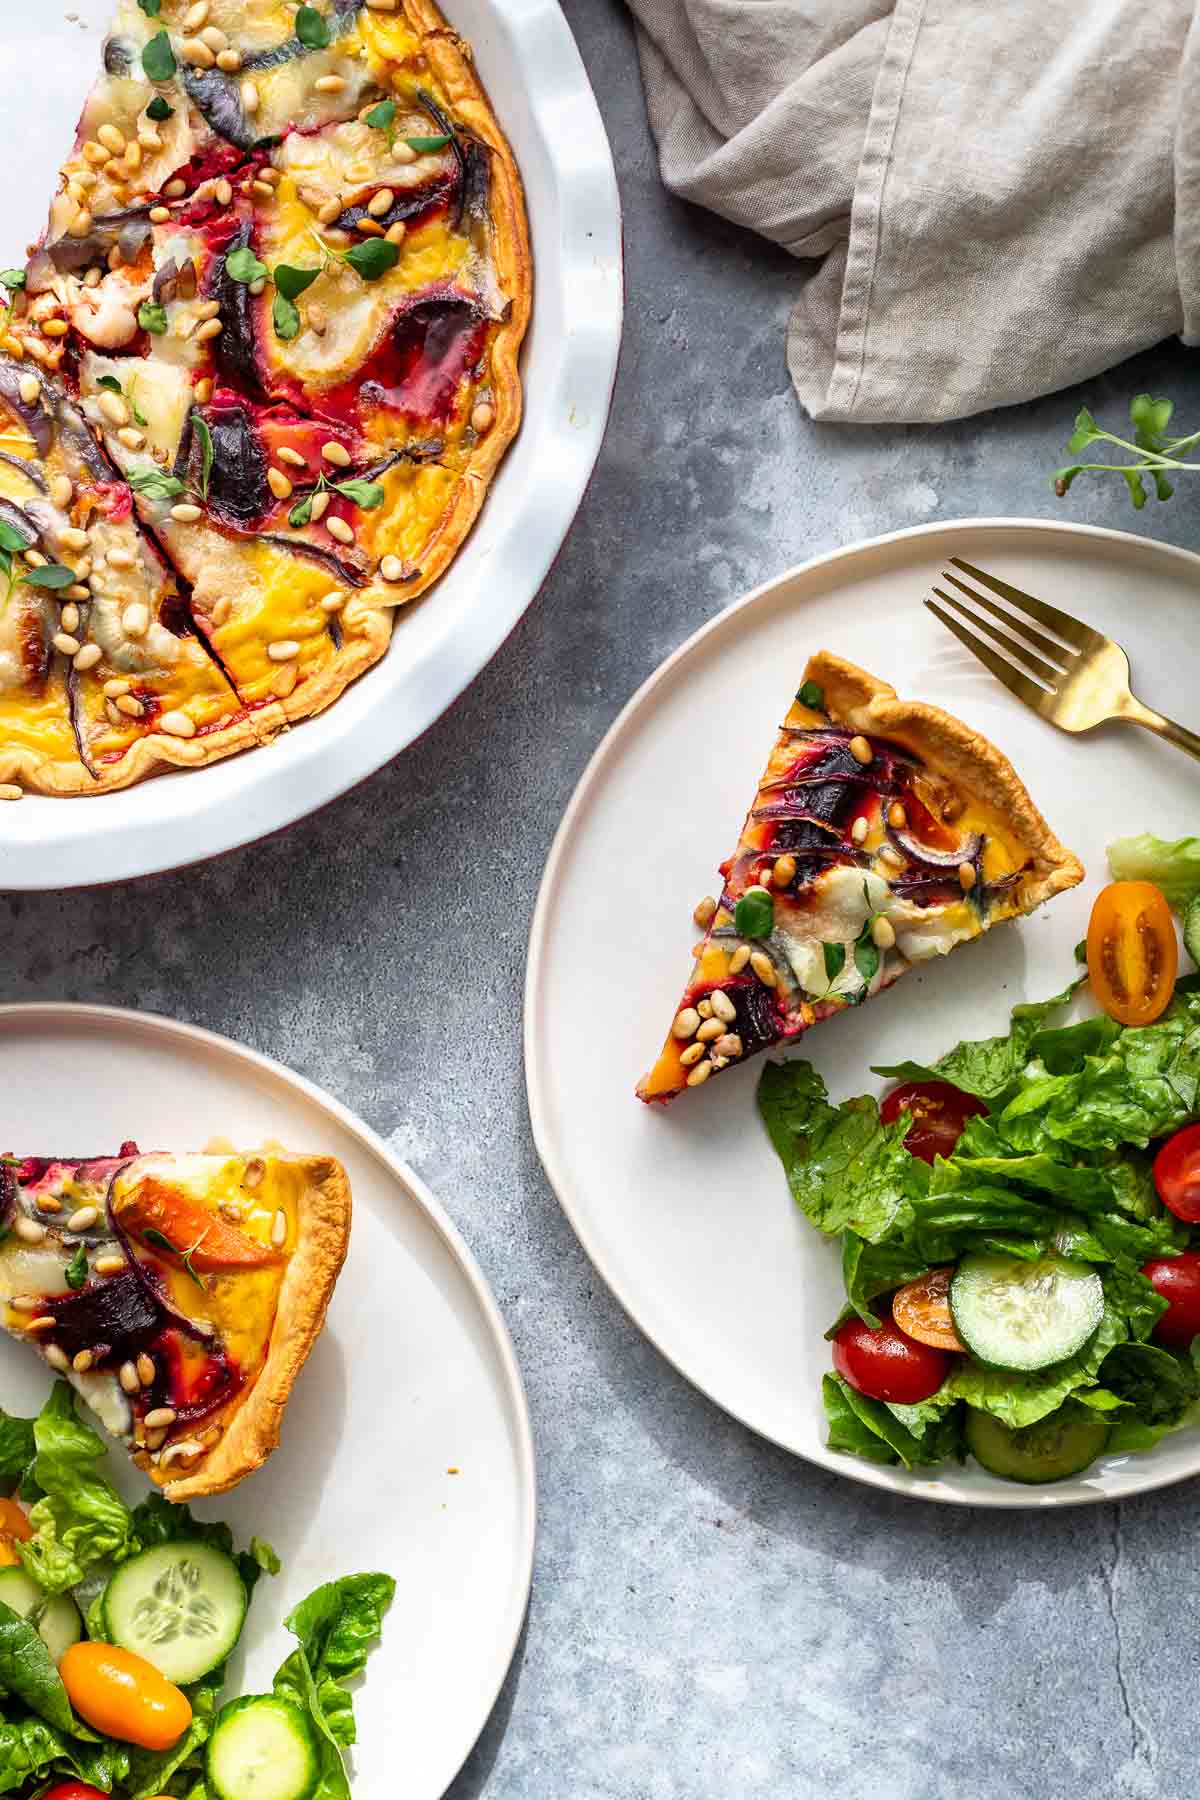 Roasted Carrot and Beetroot Quiche with Goat’s Cheese